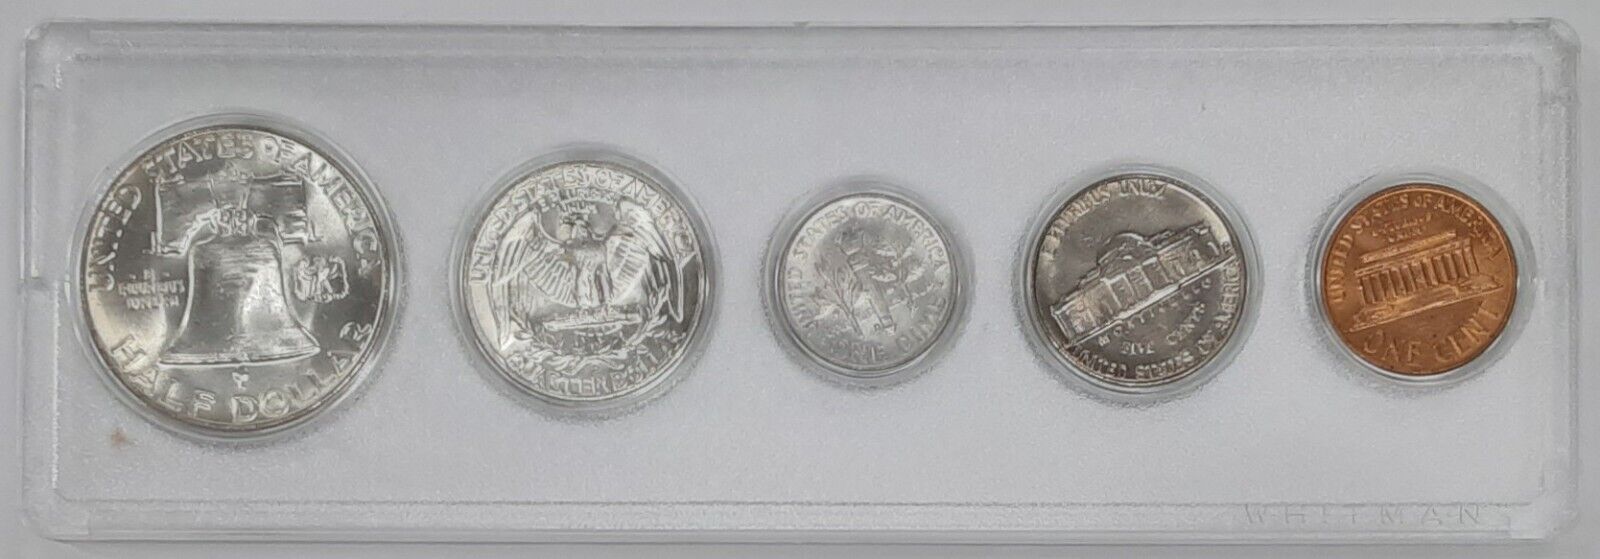 1961-D US Uncirculated Year Set with Silver Half Quarter and Dime 5 Coins Total